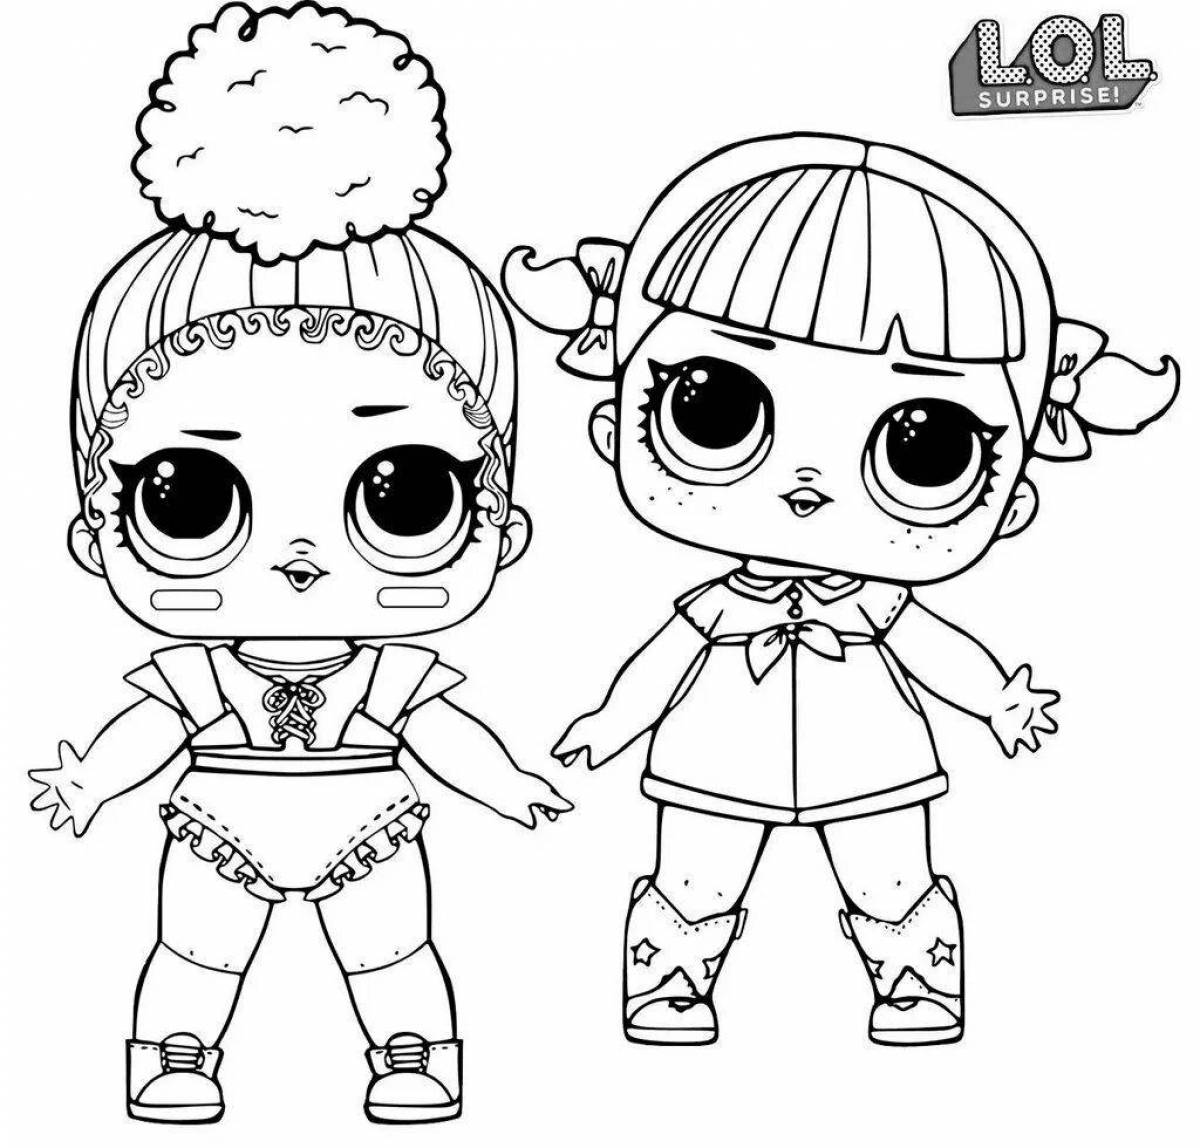 Amazing doll lol teen coloring page